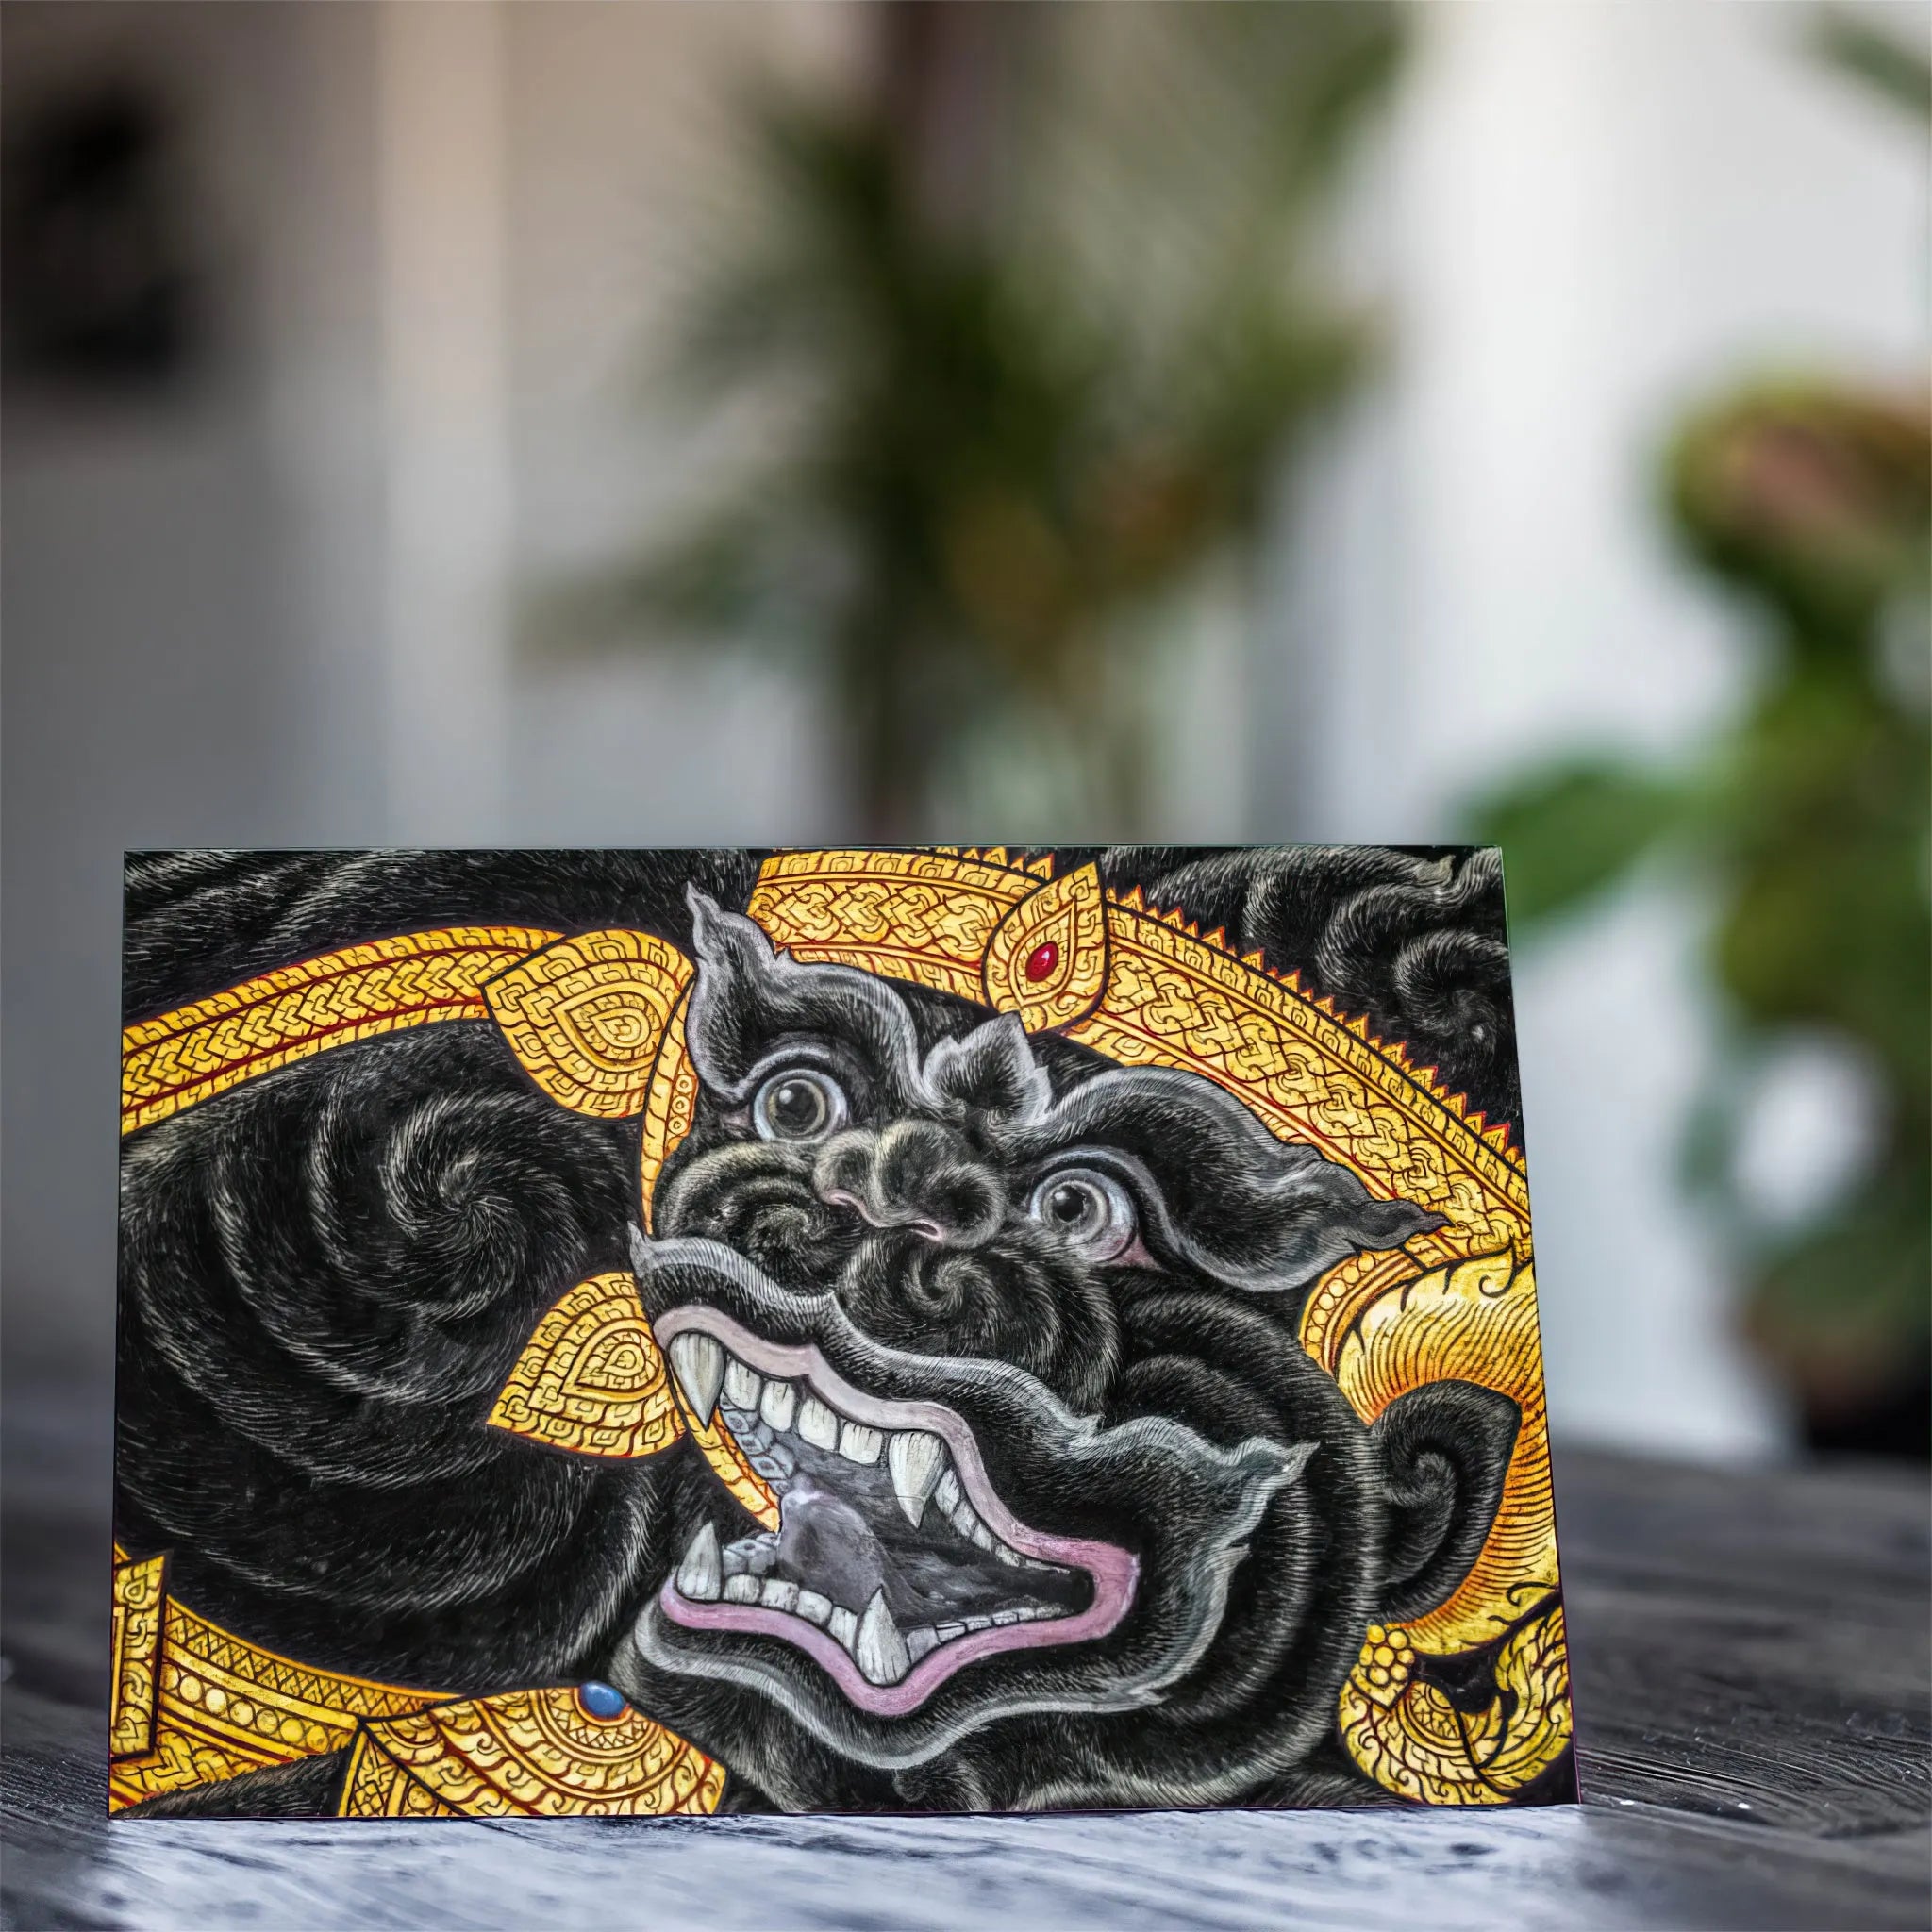 Monkey Magic Greeting Card - Greeting & Note Cards - Aesthetic Art